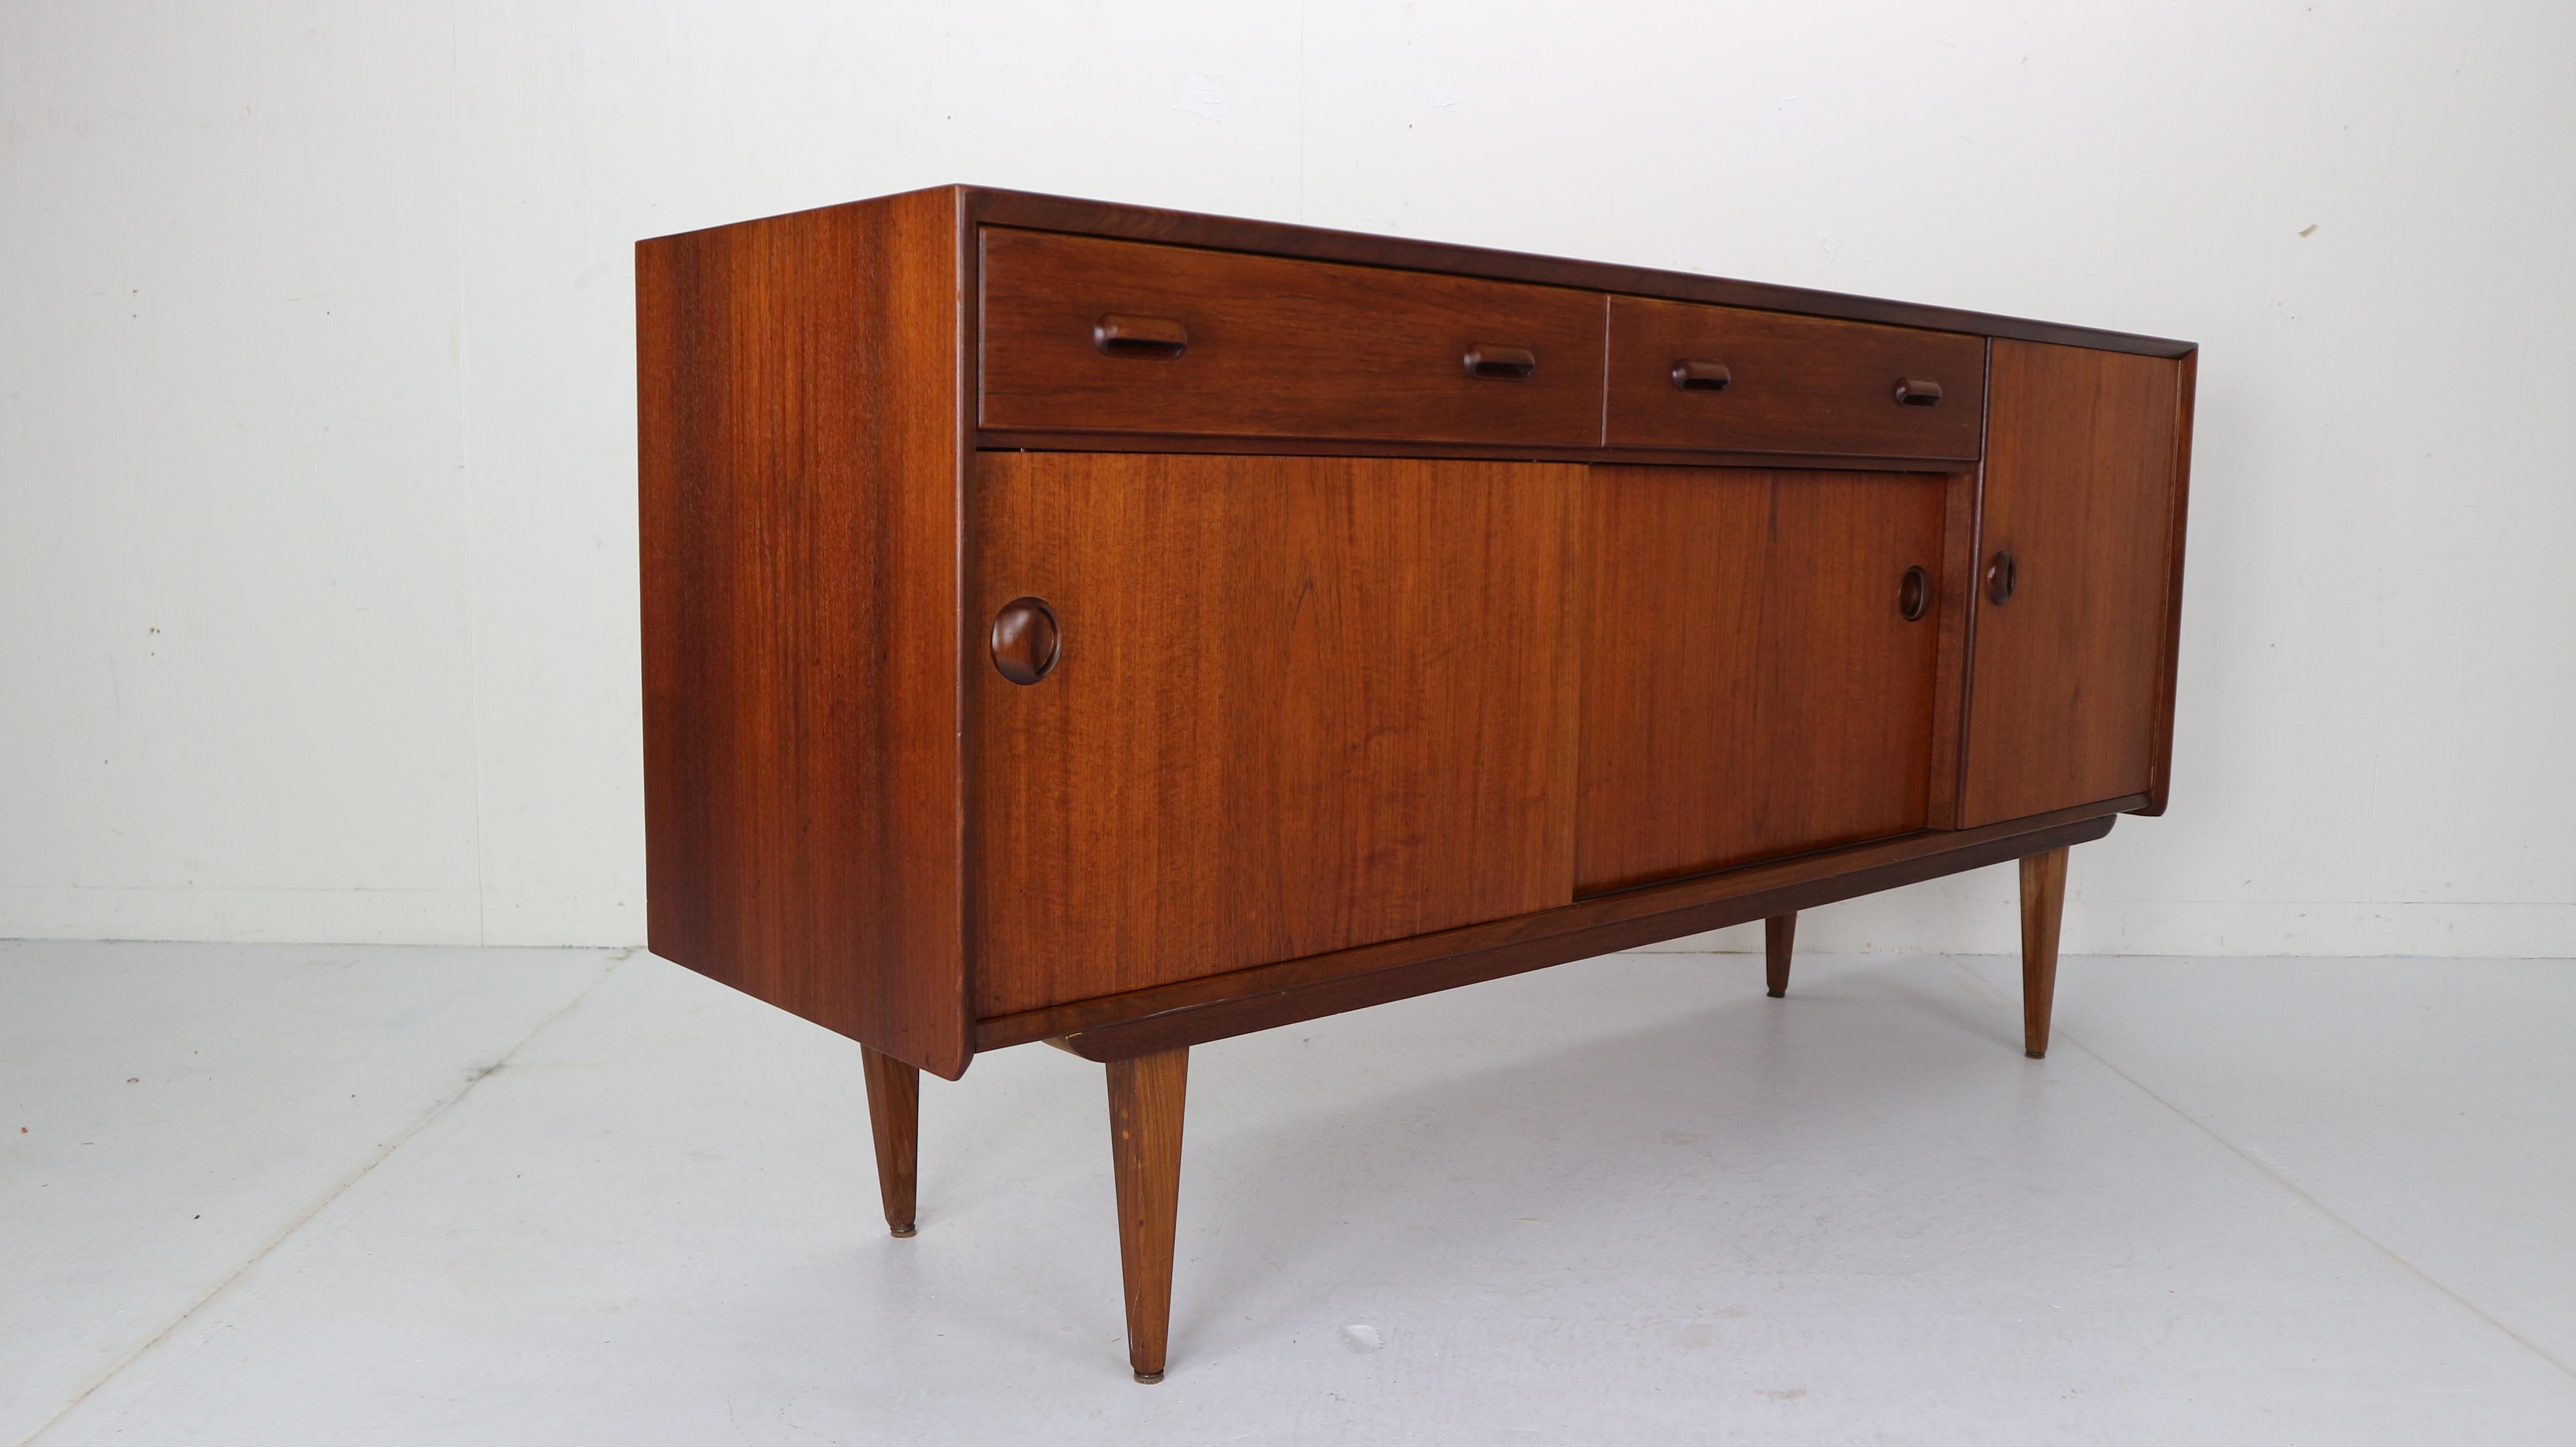 Wonderful vintage Dutch design sideboard/ credenza. Designed by Louis van Teeffelen for furniture factory Wébé in the 1960s, Netherlands.
The sideboard is made from teak wood and holds two drawers, two slide cabinets and one door cabinet, all on